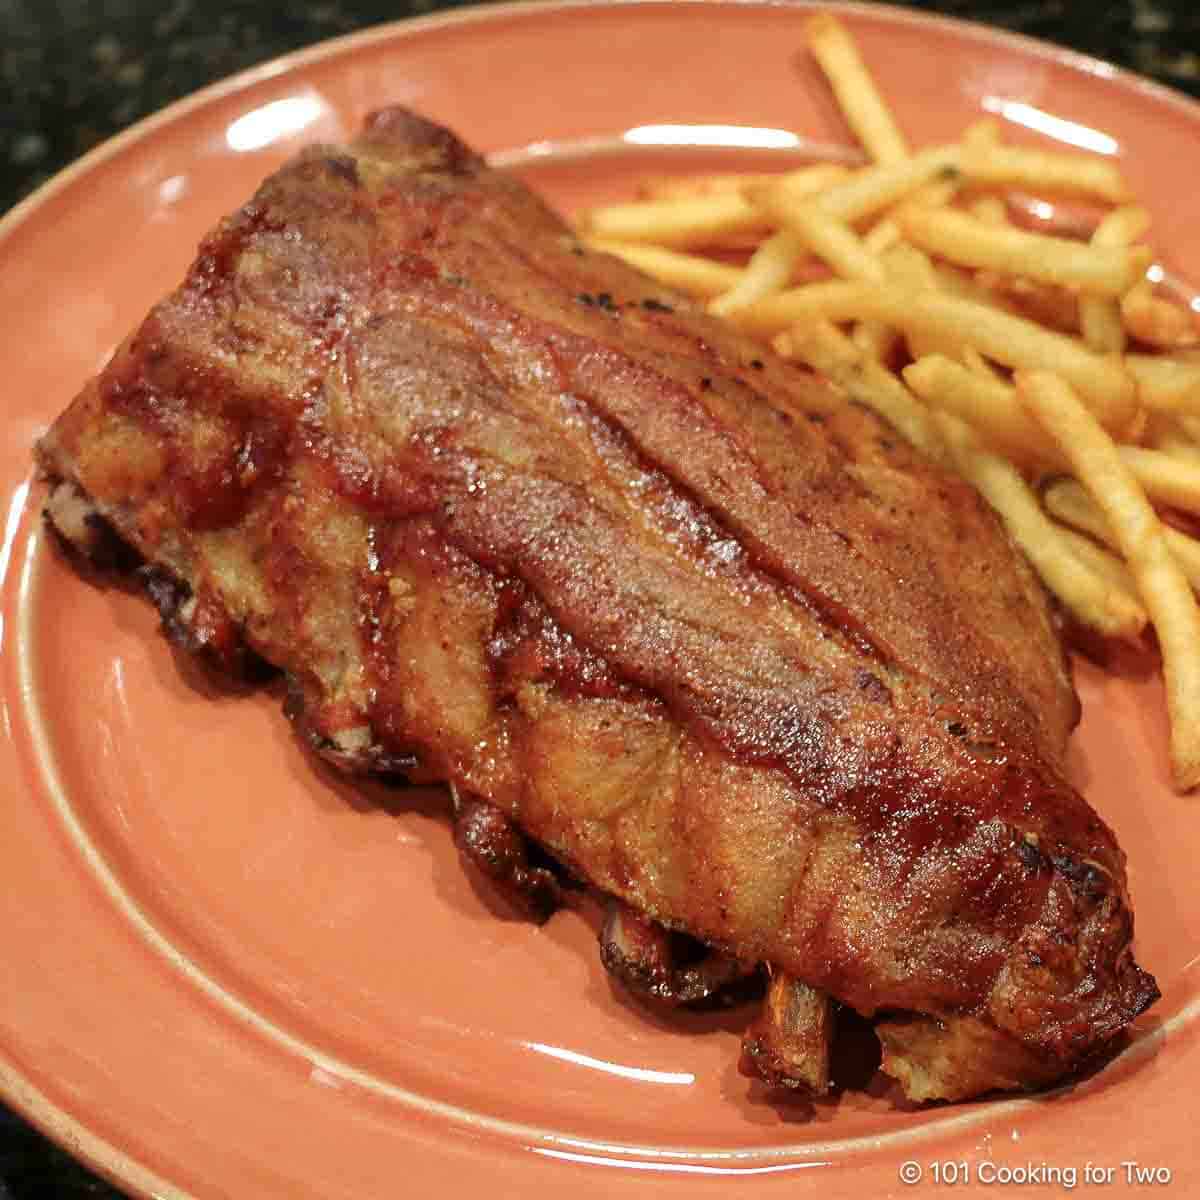 ribs with fries on plate,